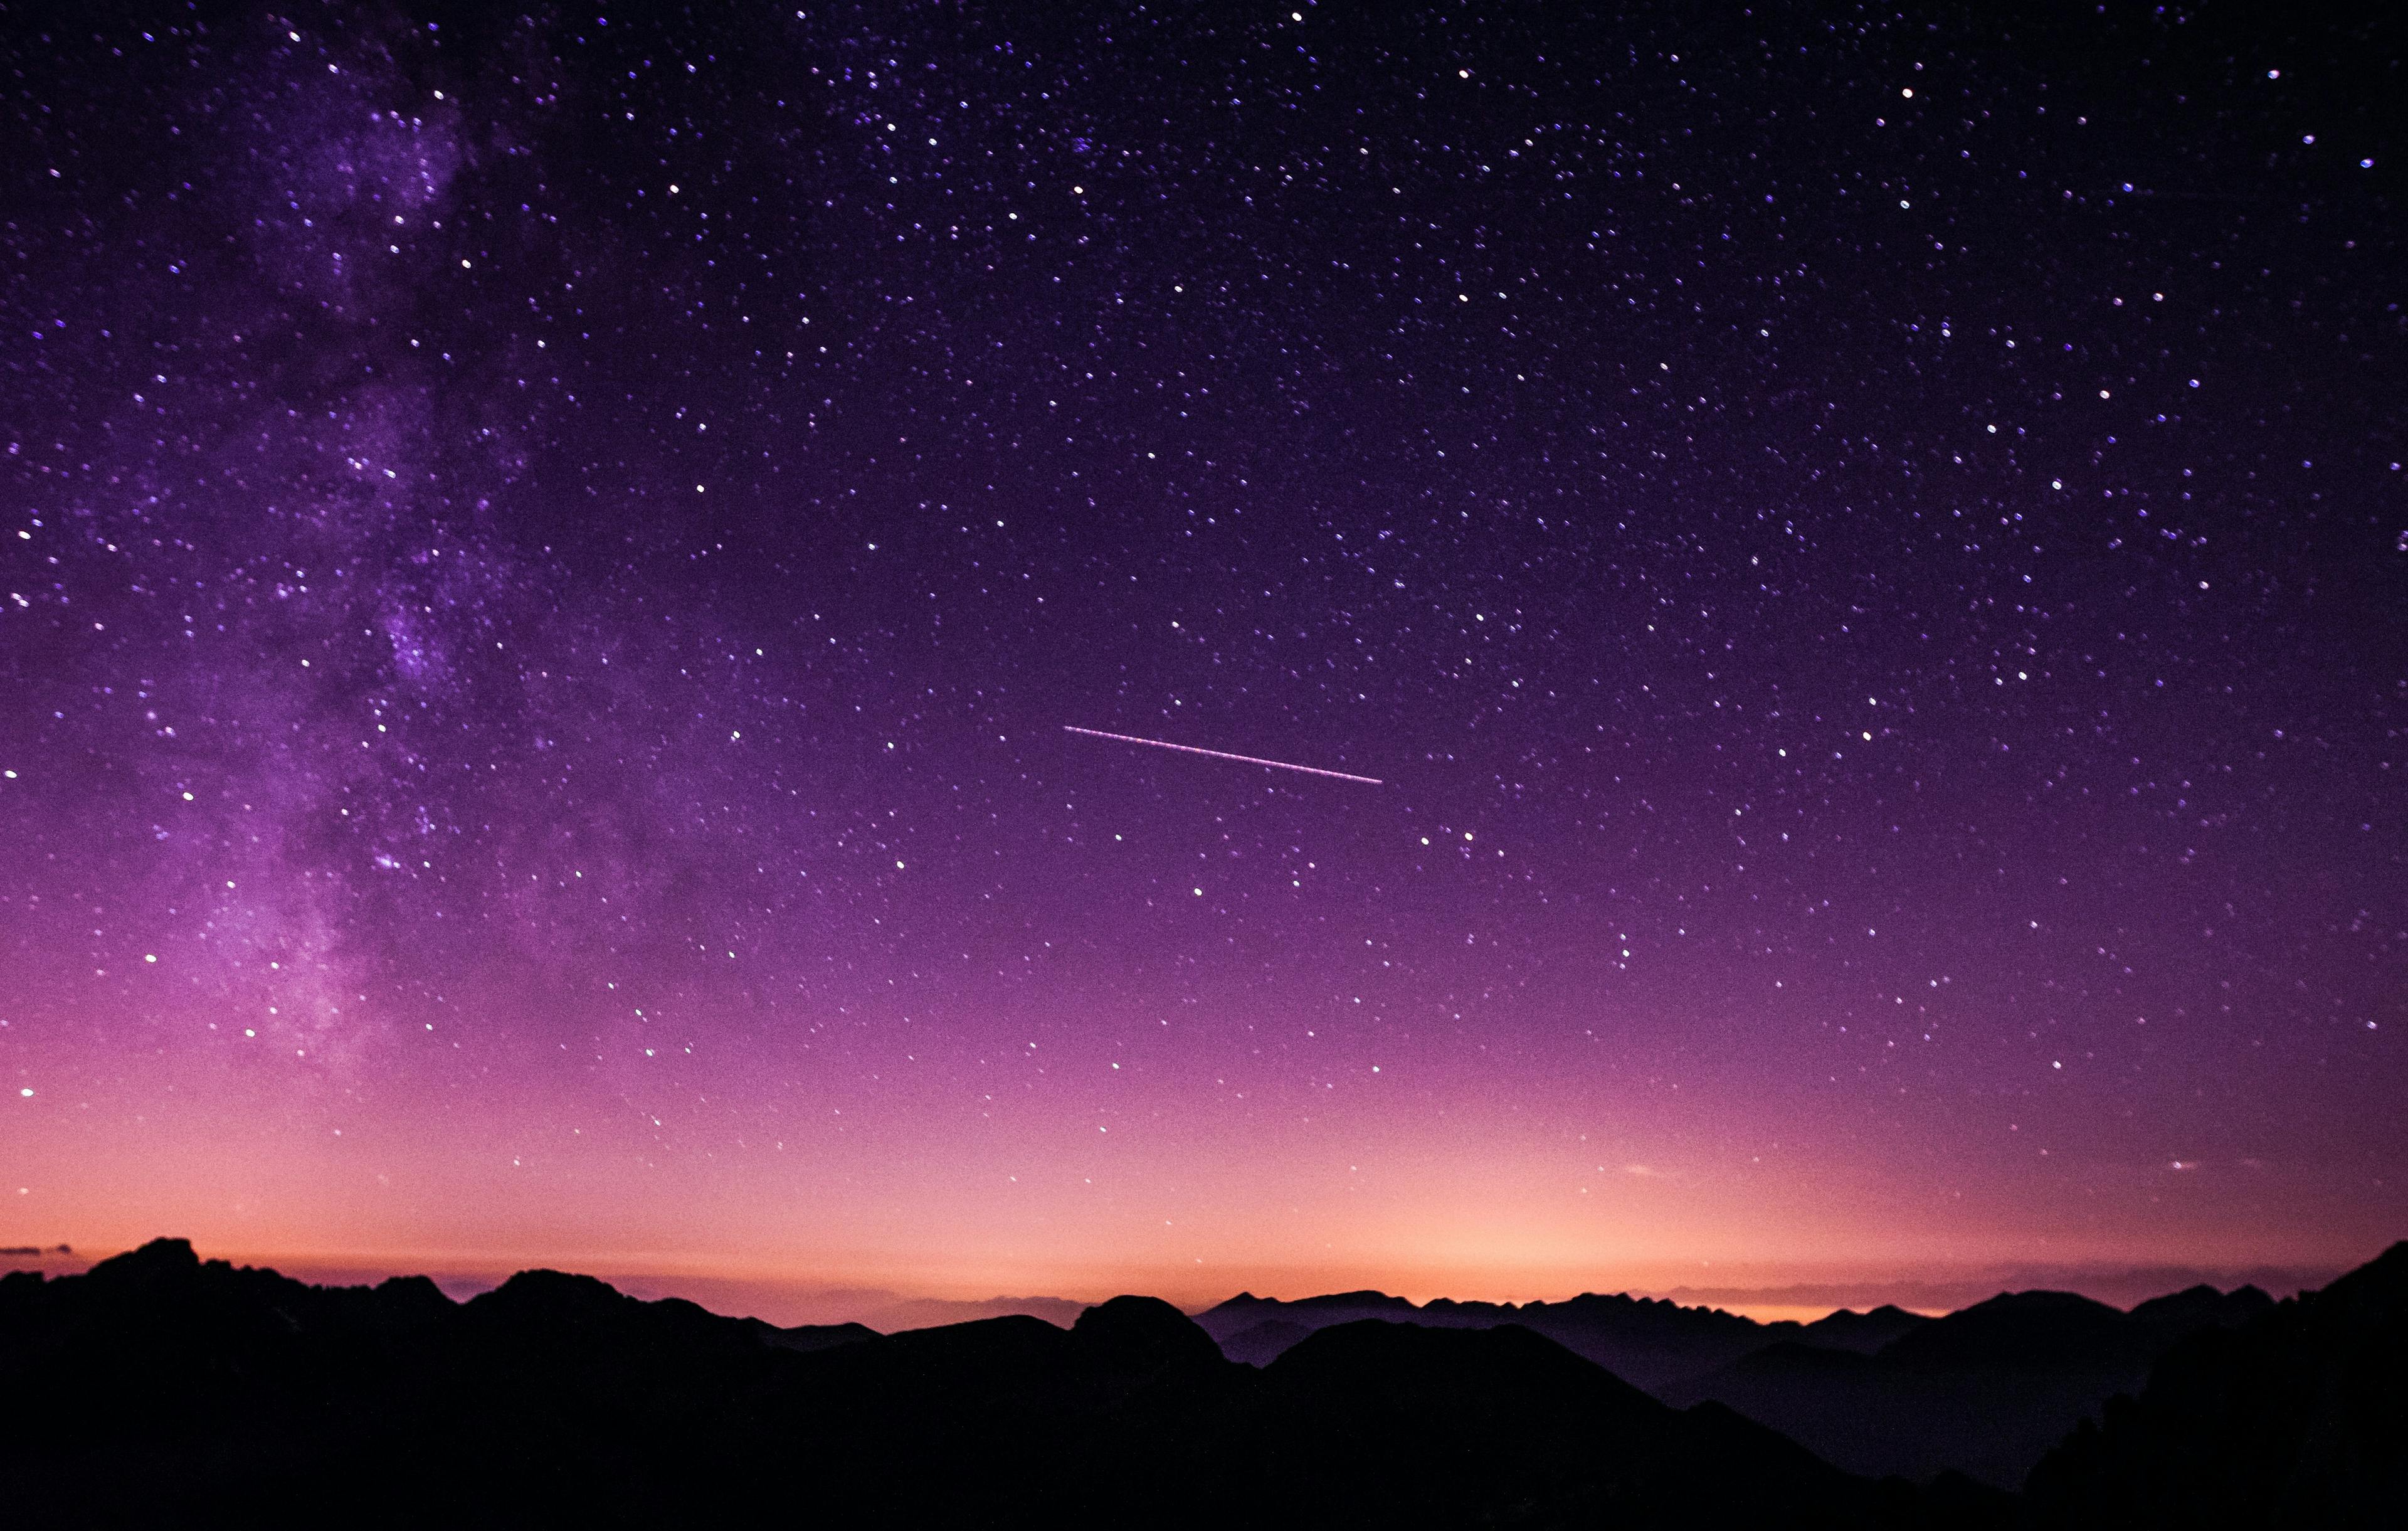 Night sky with stars and silouetted mountains